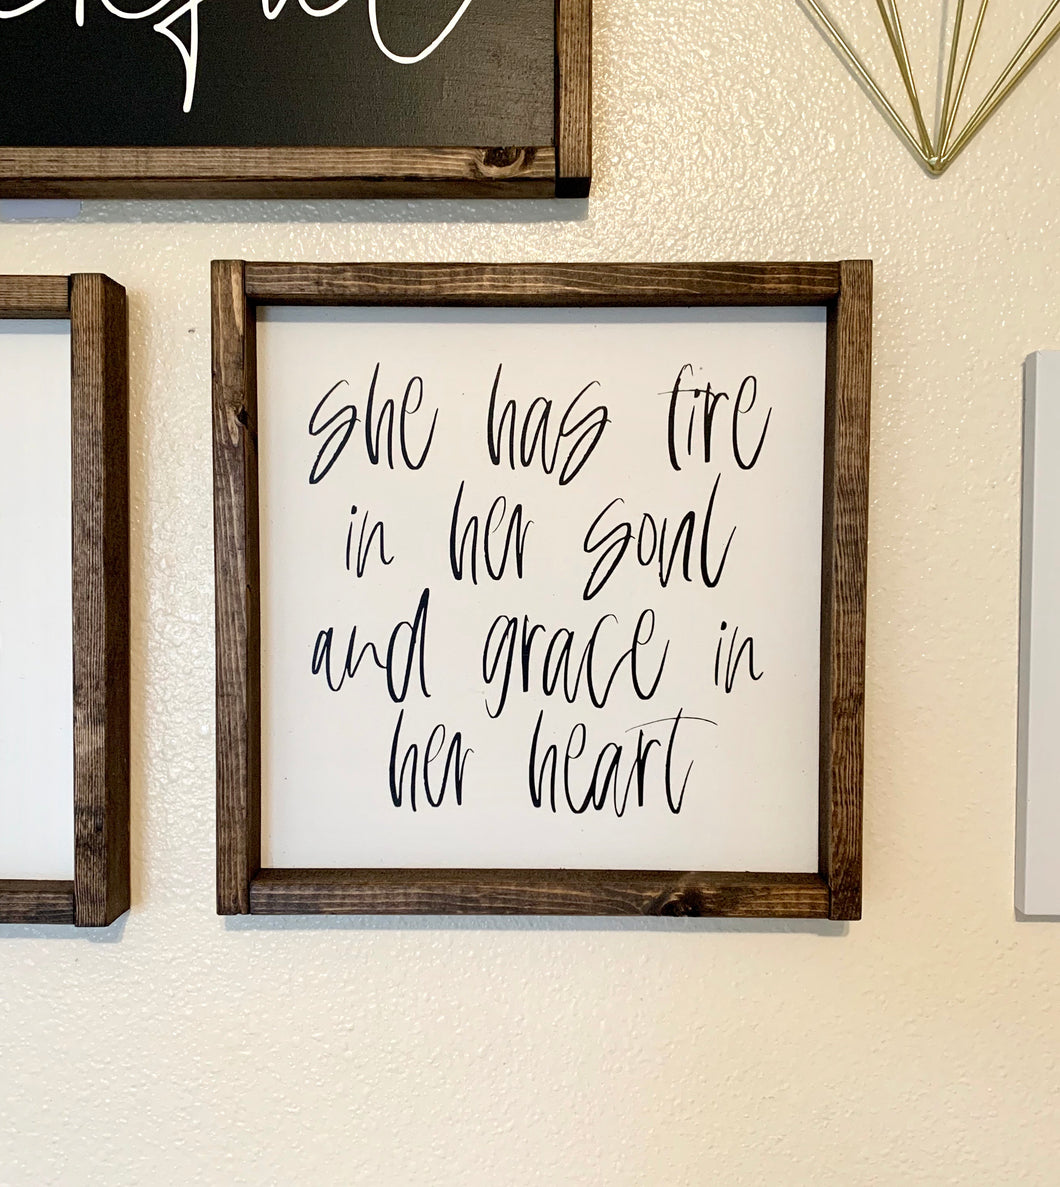 She has fire in her soul and grace in her heart | Framed wood sign